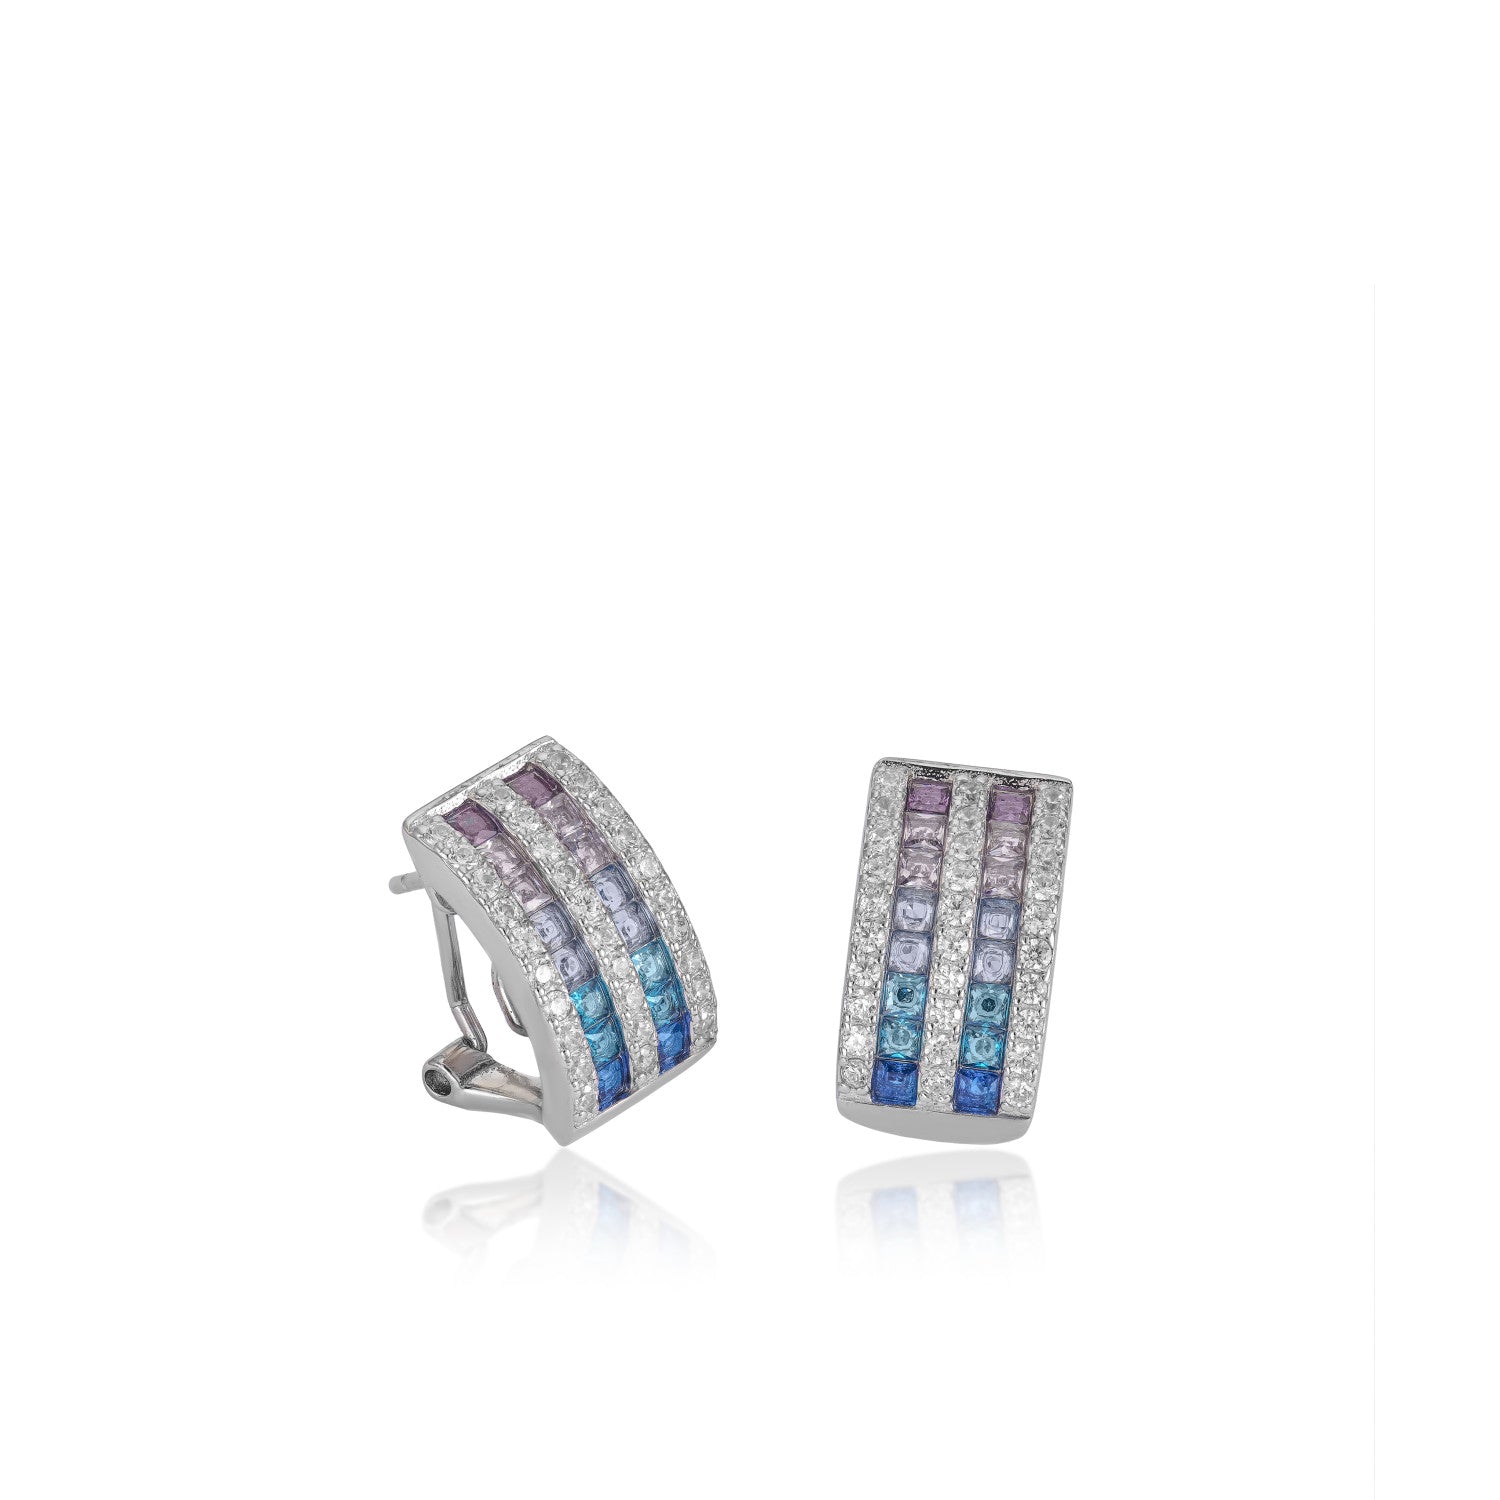 Earrings with omega clasp blue gemstones and zircons